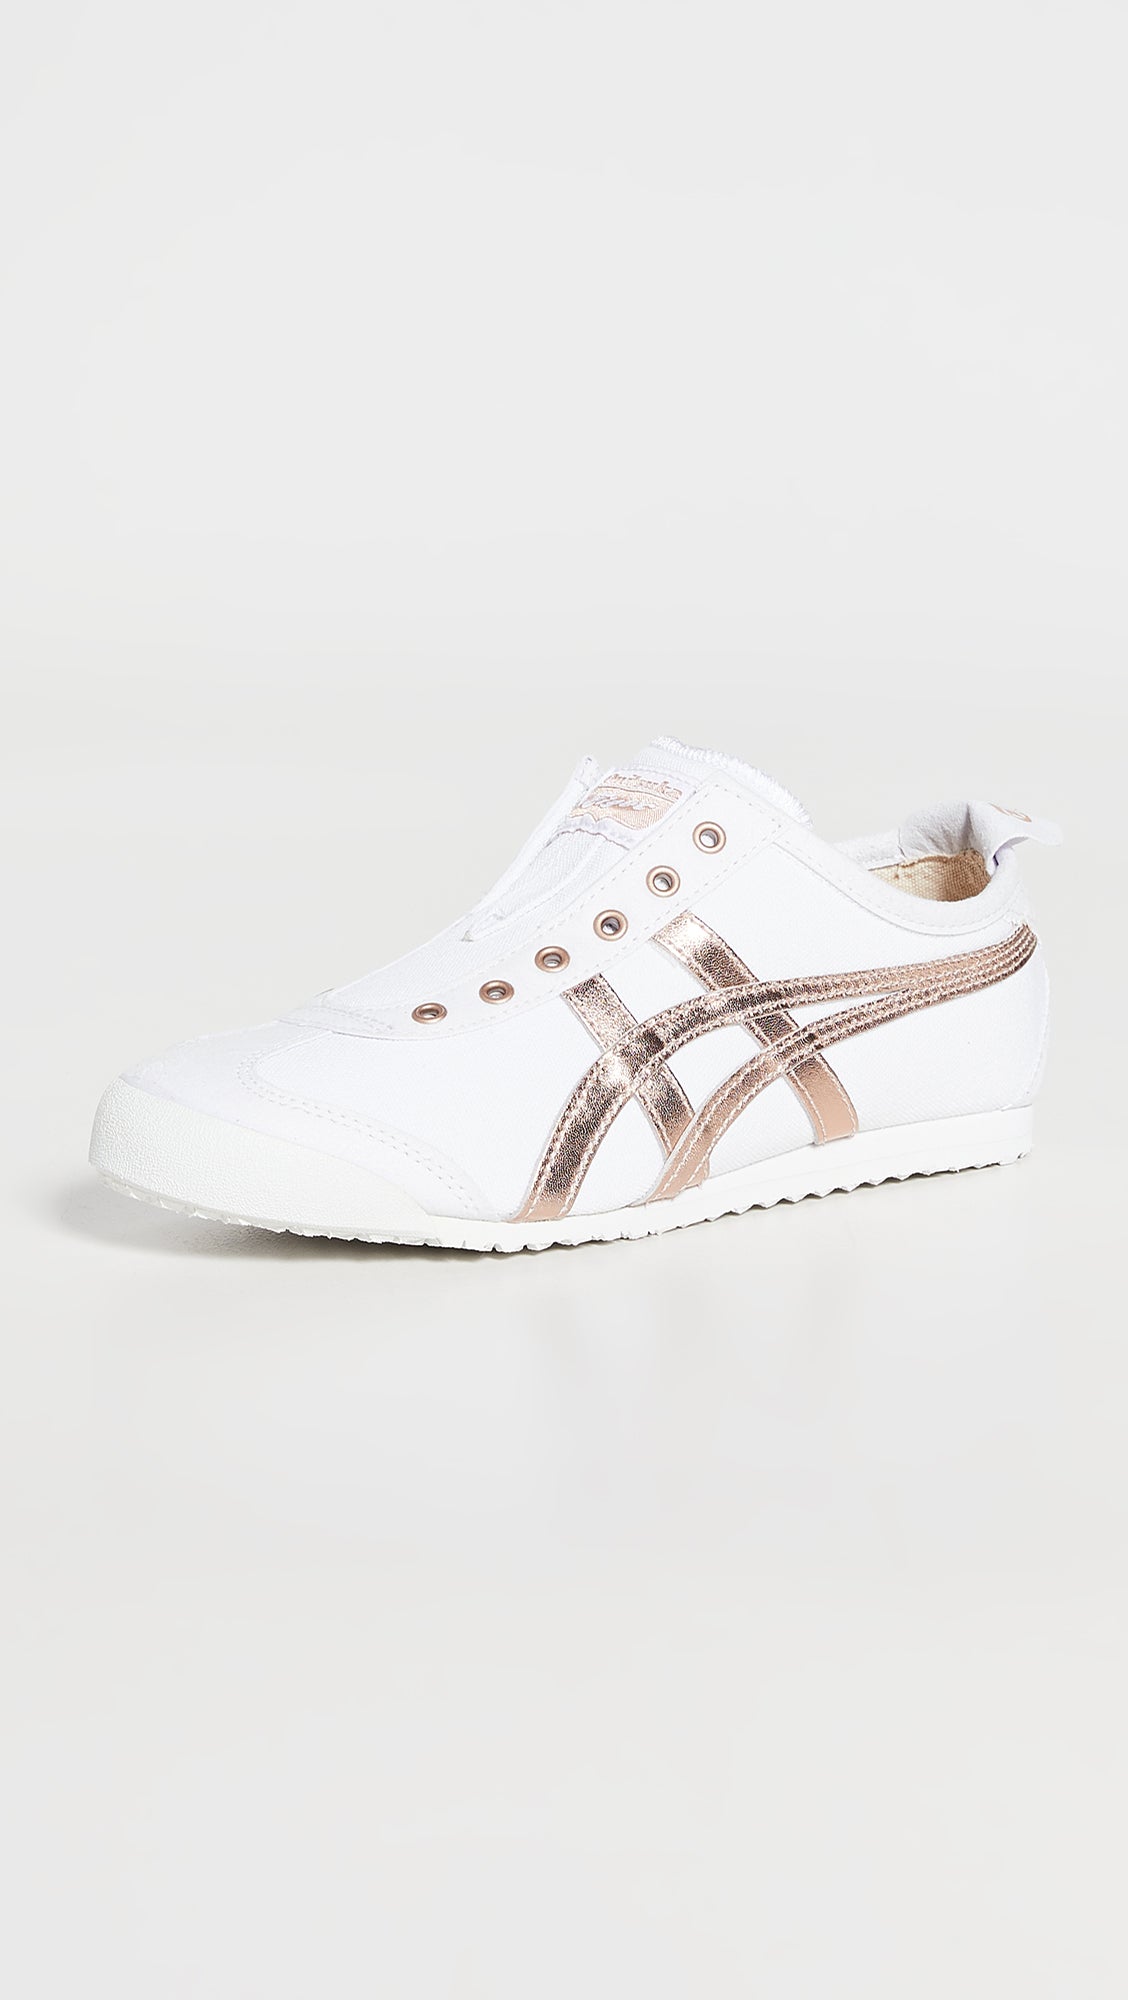 First Copy Onitsuka Tiger Mexico 66 Slip On Sneakers (White/Rose Gold)